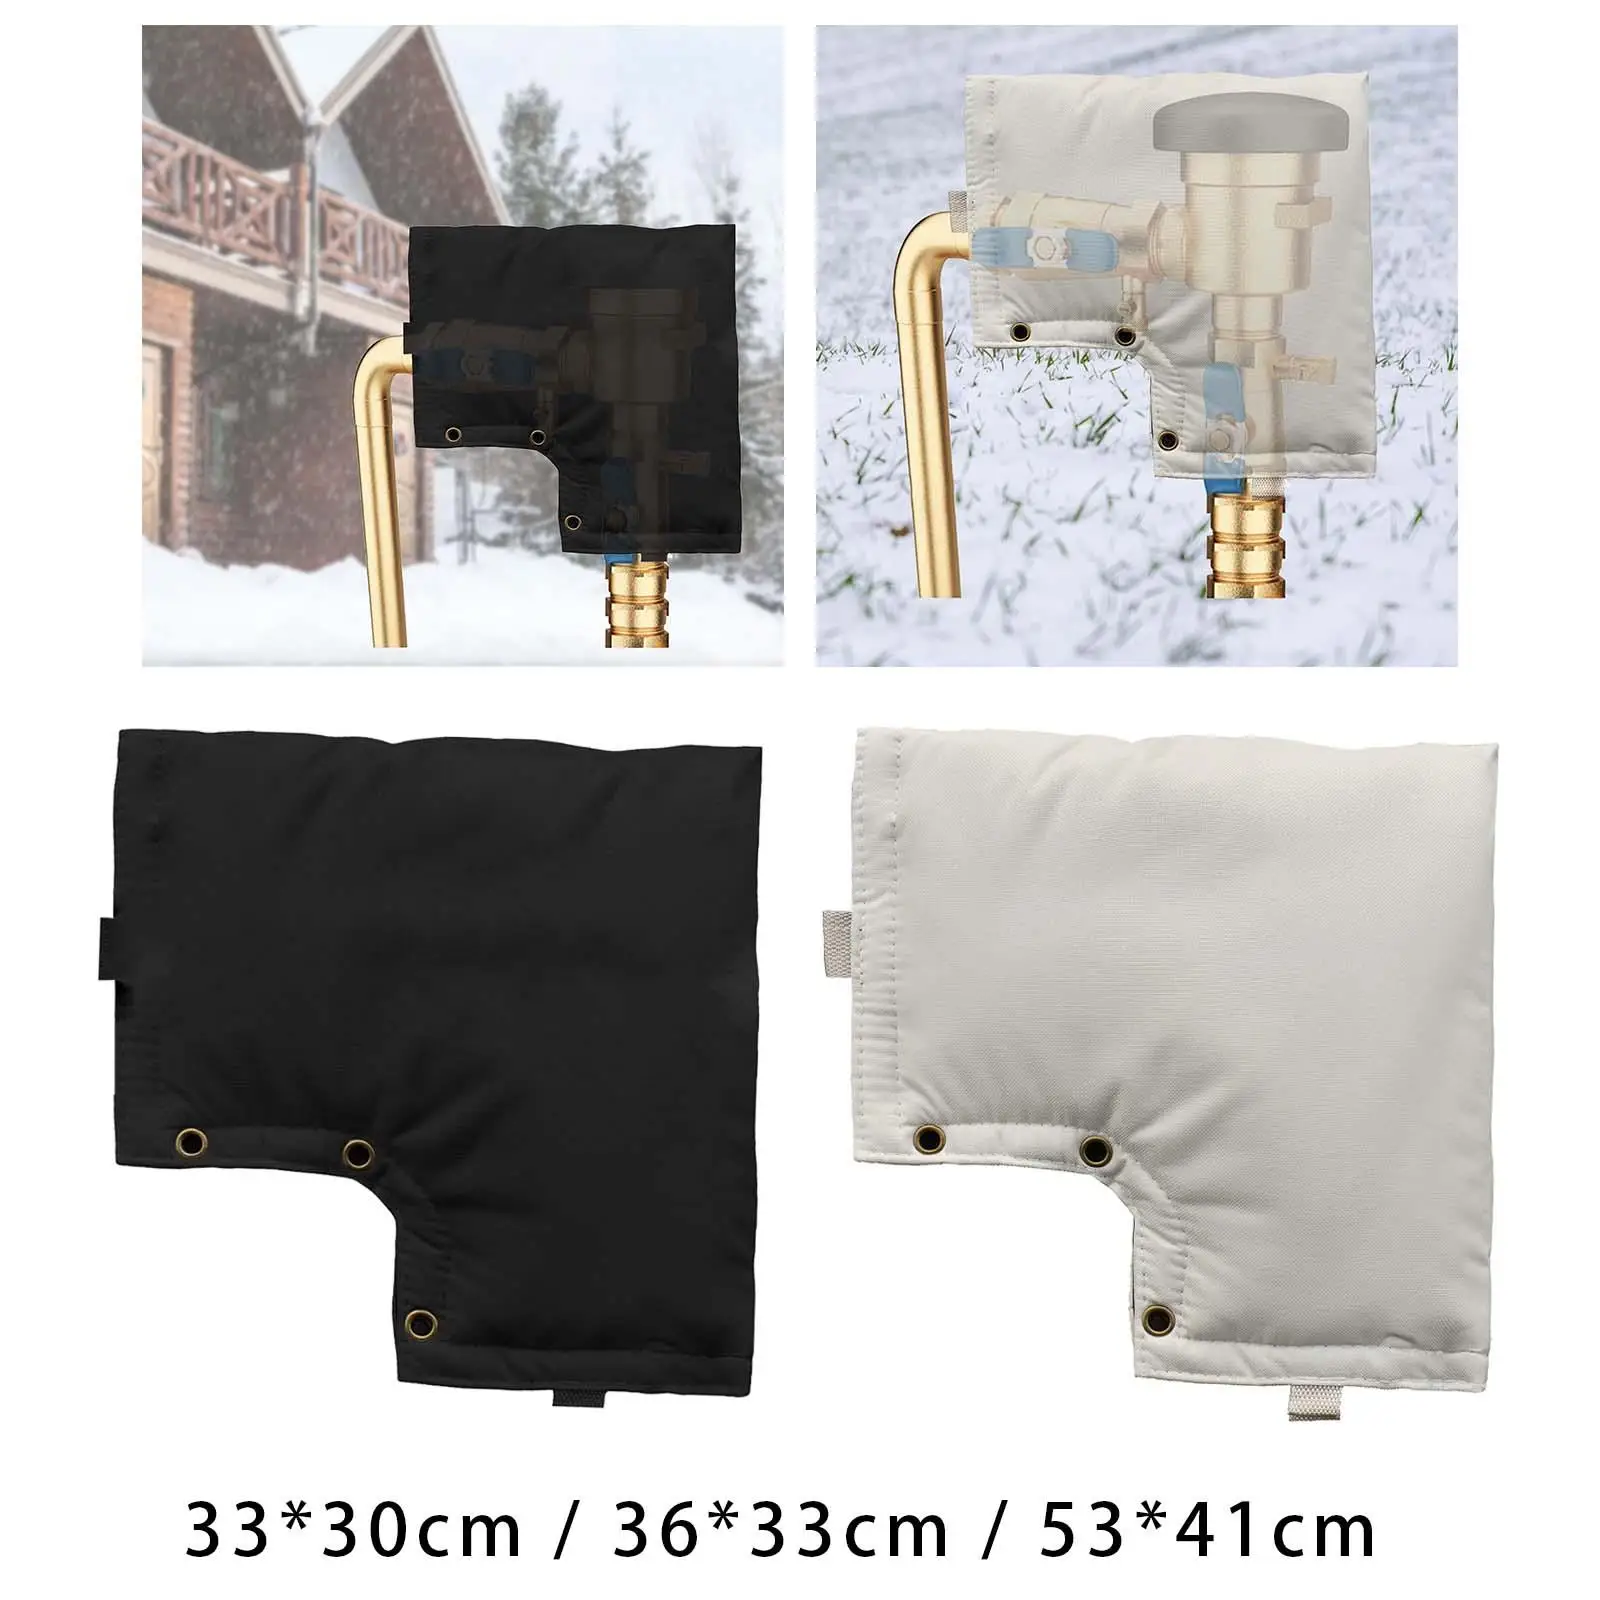 Backflow Preventer Cover Insulation Pouch for Winter Freeze Protection